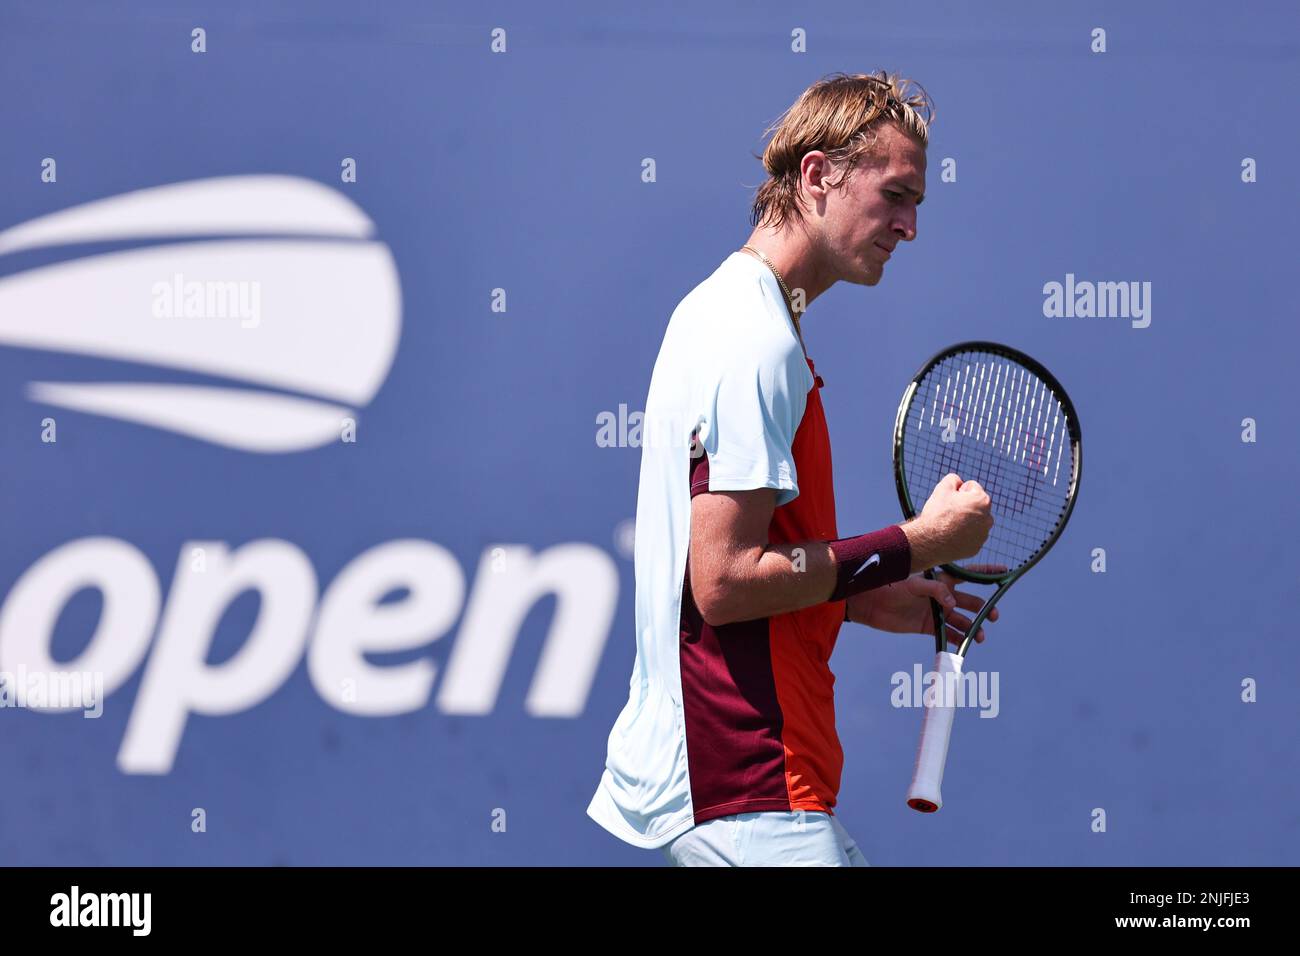 Sebastian Korda reacts during a Mens Singles match at the 2022 US Open, Monday, Aug